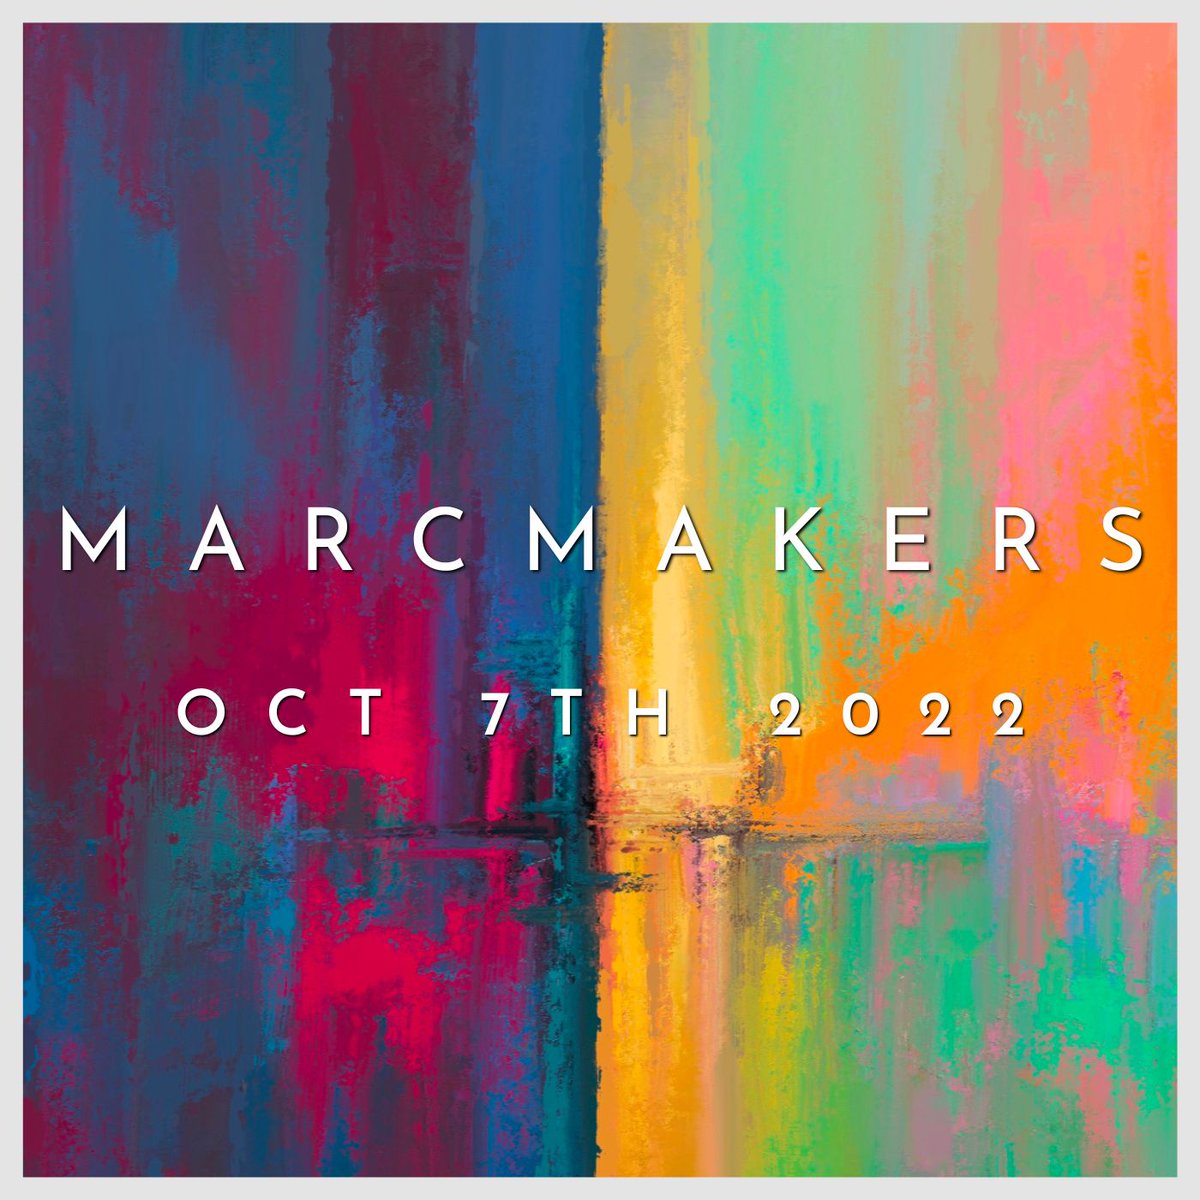 Save the Date...October 7th...New Single & Official Music Video!
#marcmakers #higher #TBR #upcomingsingle #musicvideo #popmusic #edgypop